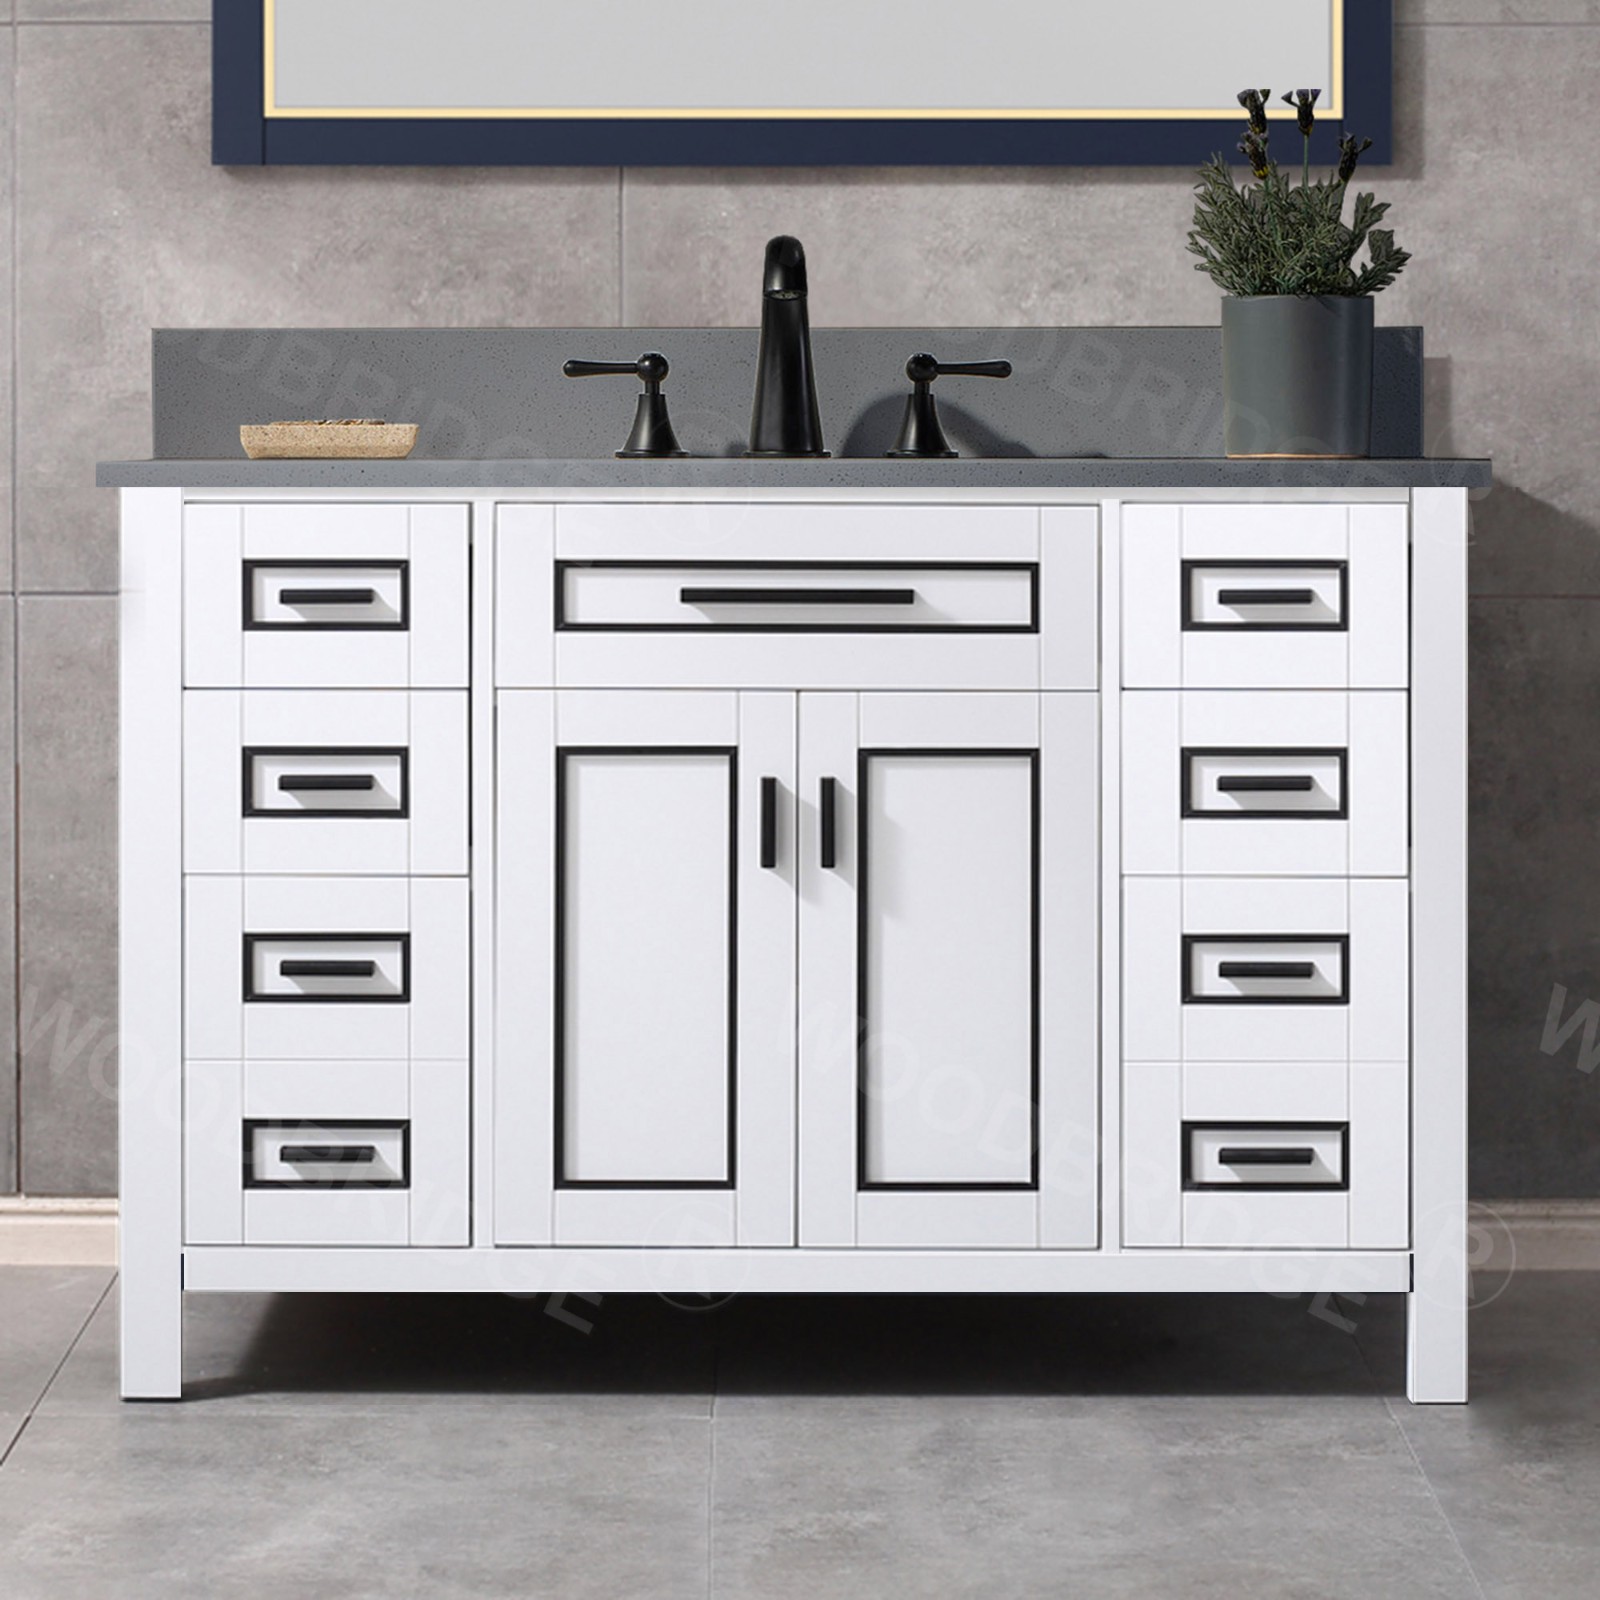  WOODBRIDGE Milan  49” Floor Mounted Single Basin Vanity Set with Solid Wood Cabinet in White and Engineered stone composite Vanity Top in Dark Gray with Pre-installed Undermount Rectangle Bathroom Sink in White and Pre-Drilled 3-Hole for 8” Widespread Fau_4683